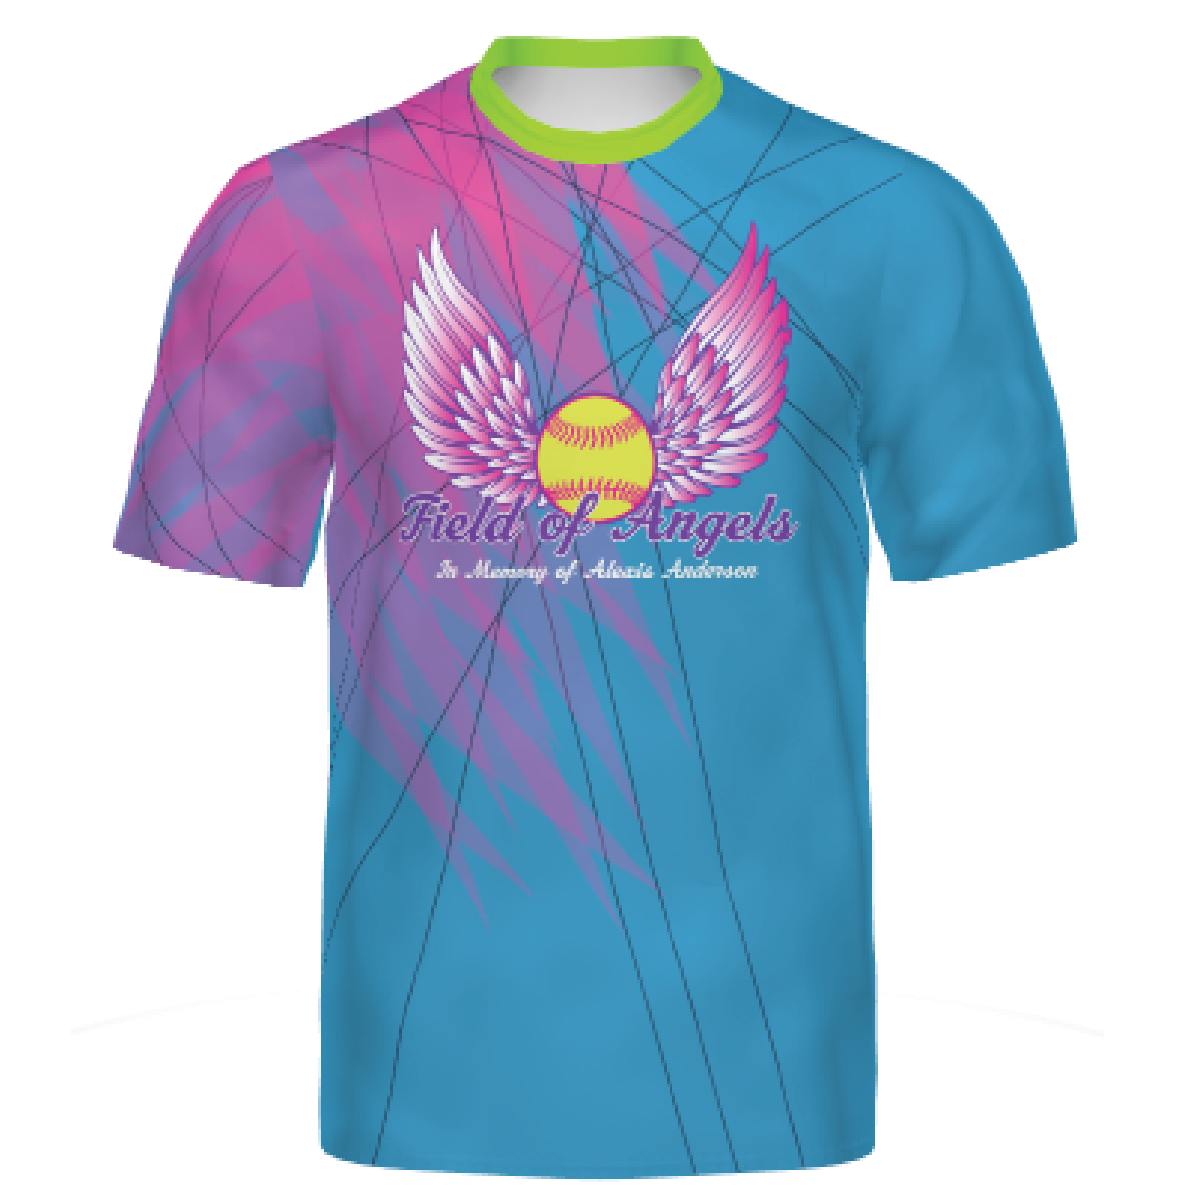 Field of Angels Youth Sublimated Shirt